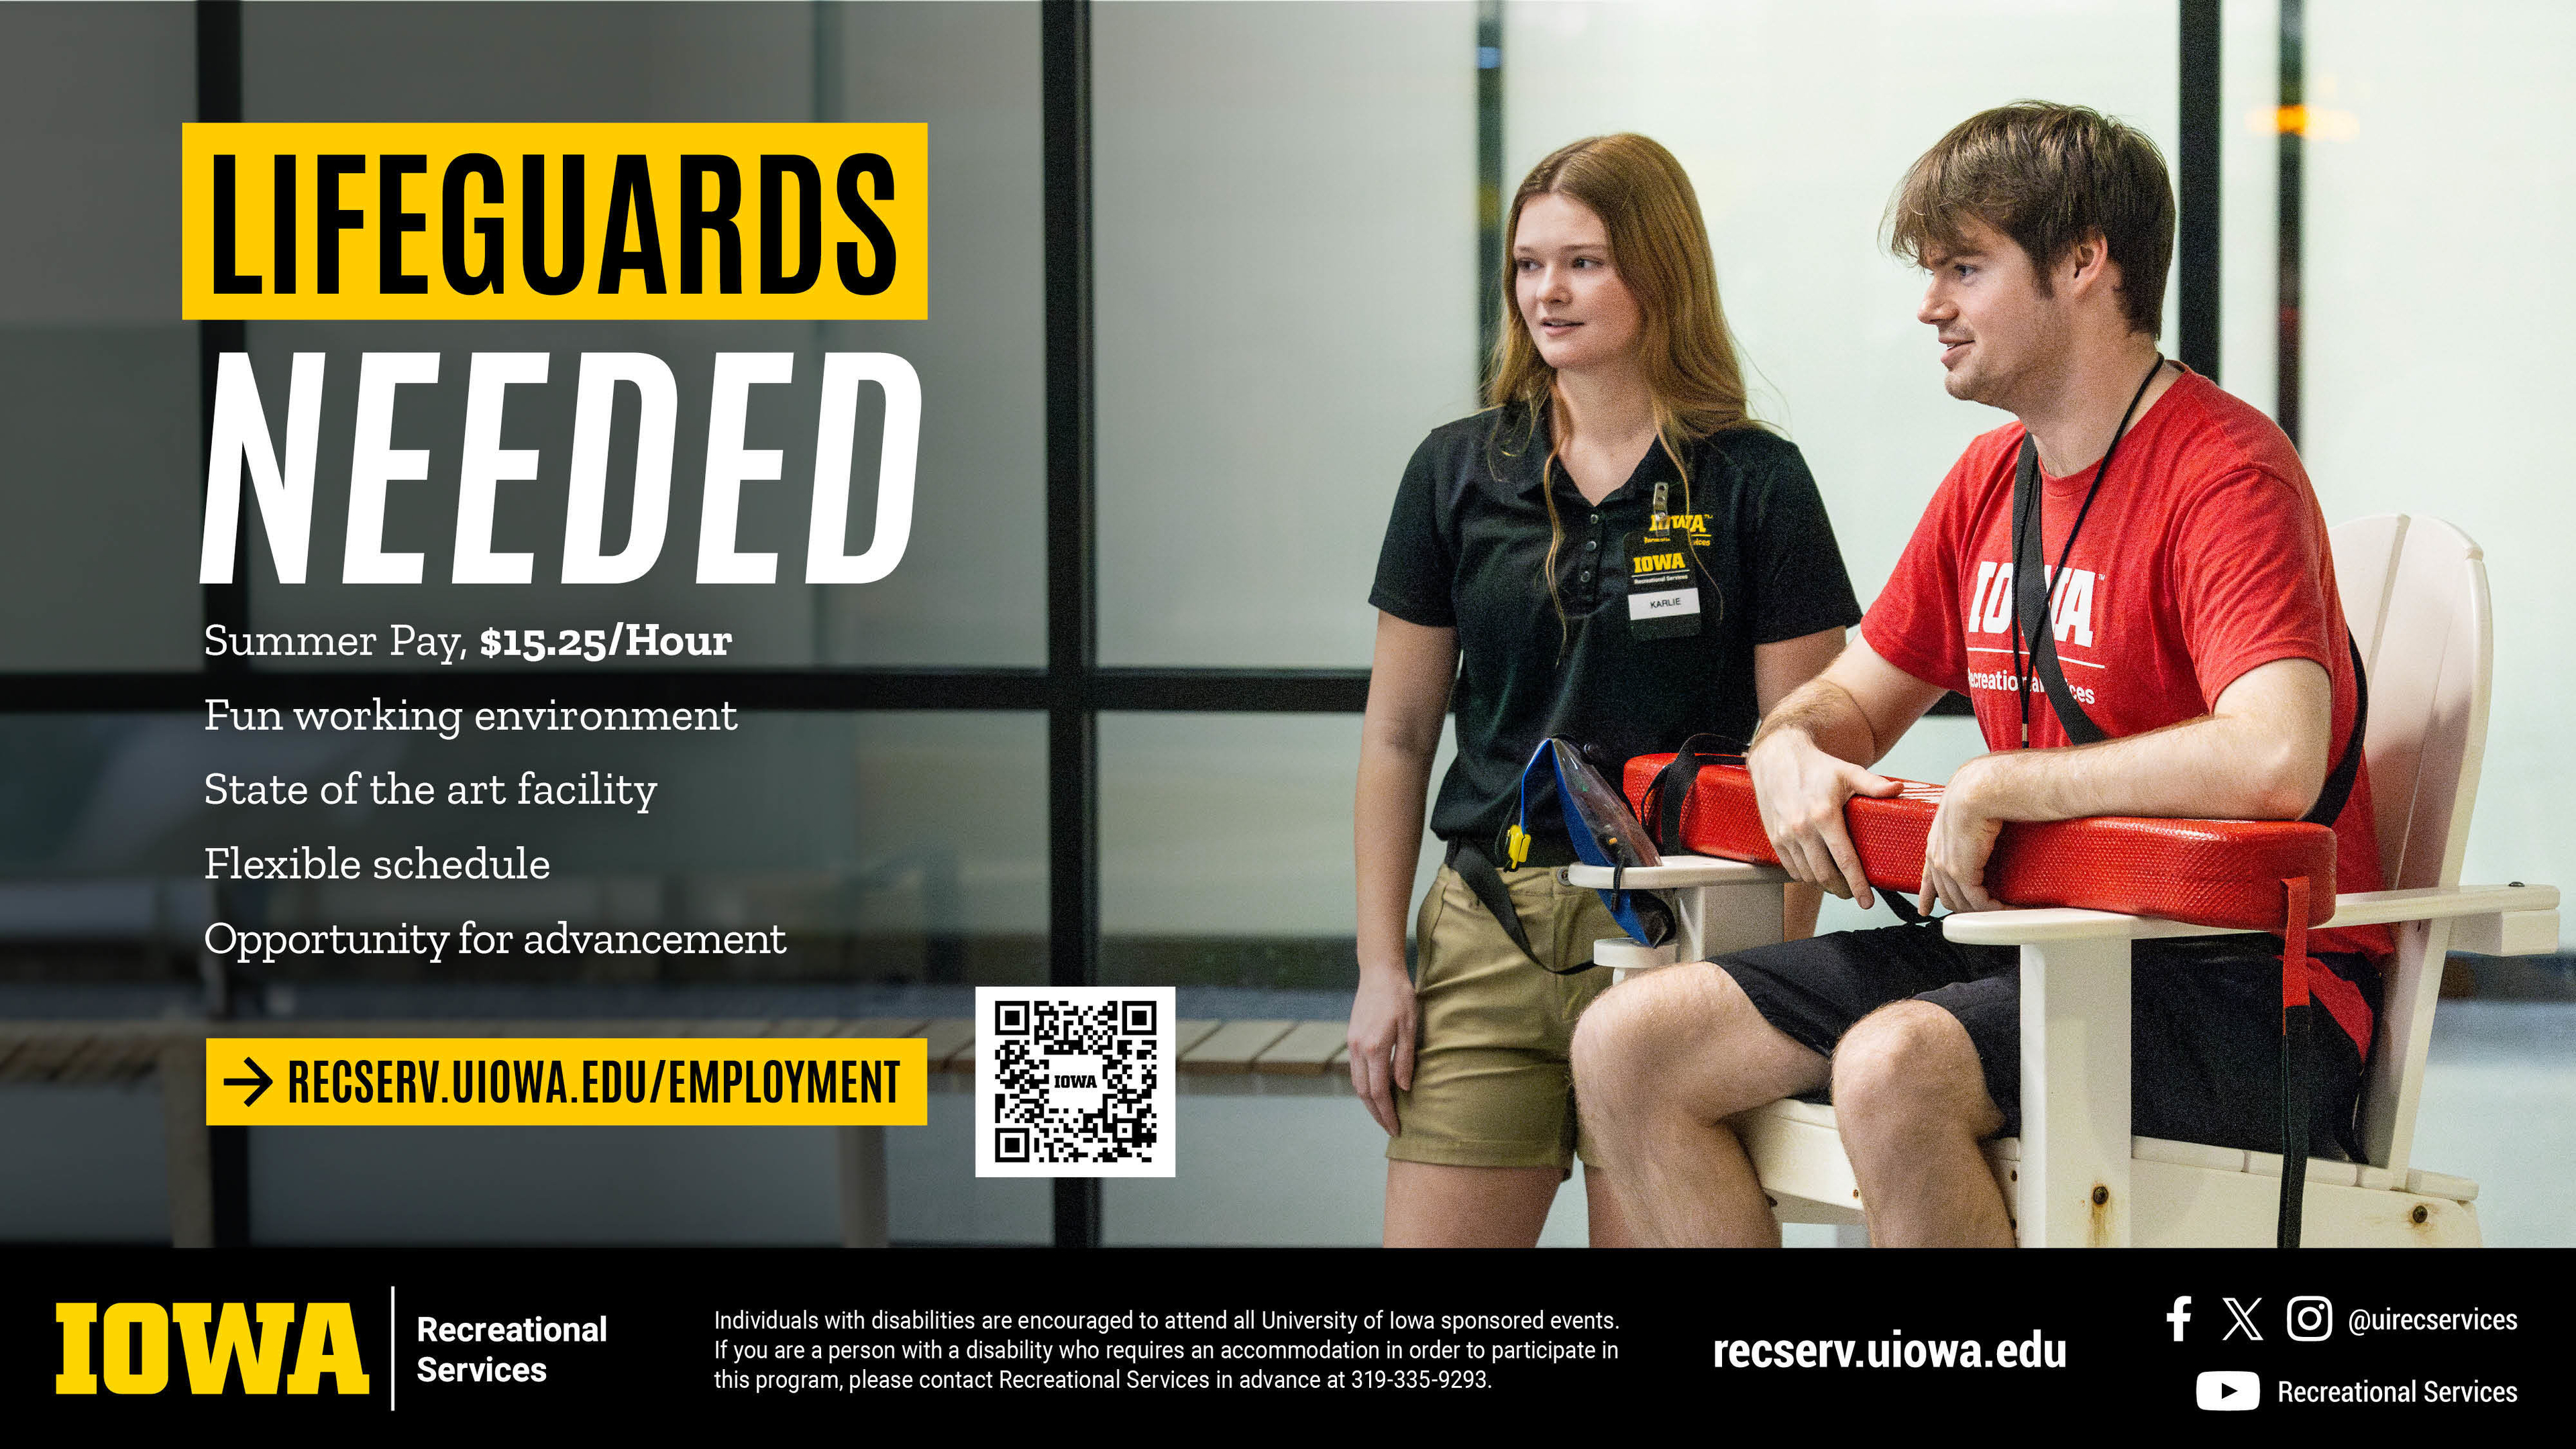 Lifeguards Needed. Pay $15.25 per hour. Fun working environment. State of the art facility.  Flexible schedule. Opportunity for advancement.  go to recserv.uiowa/employment